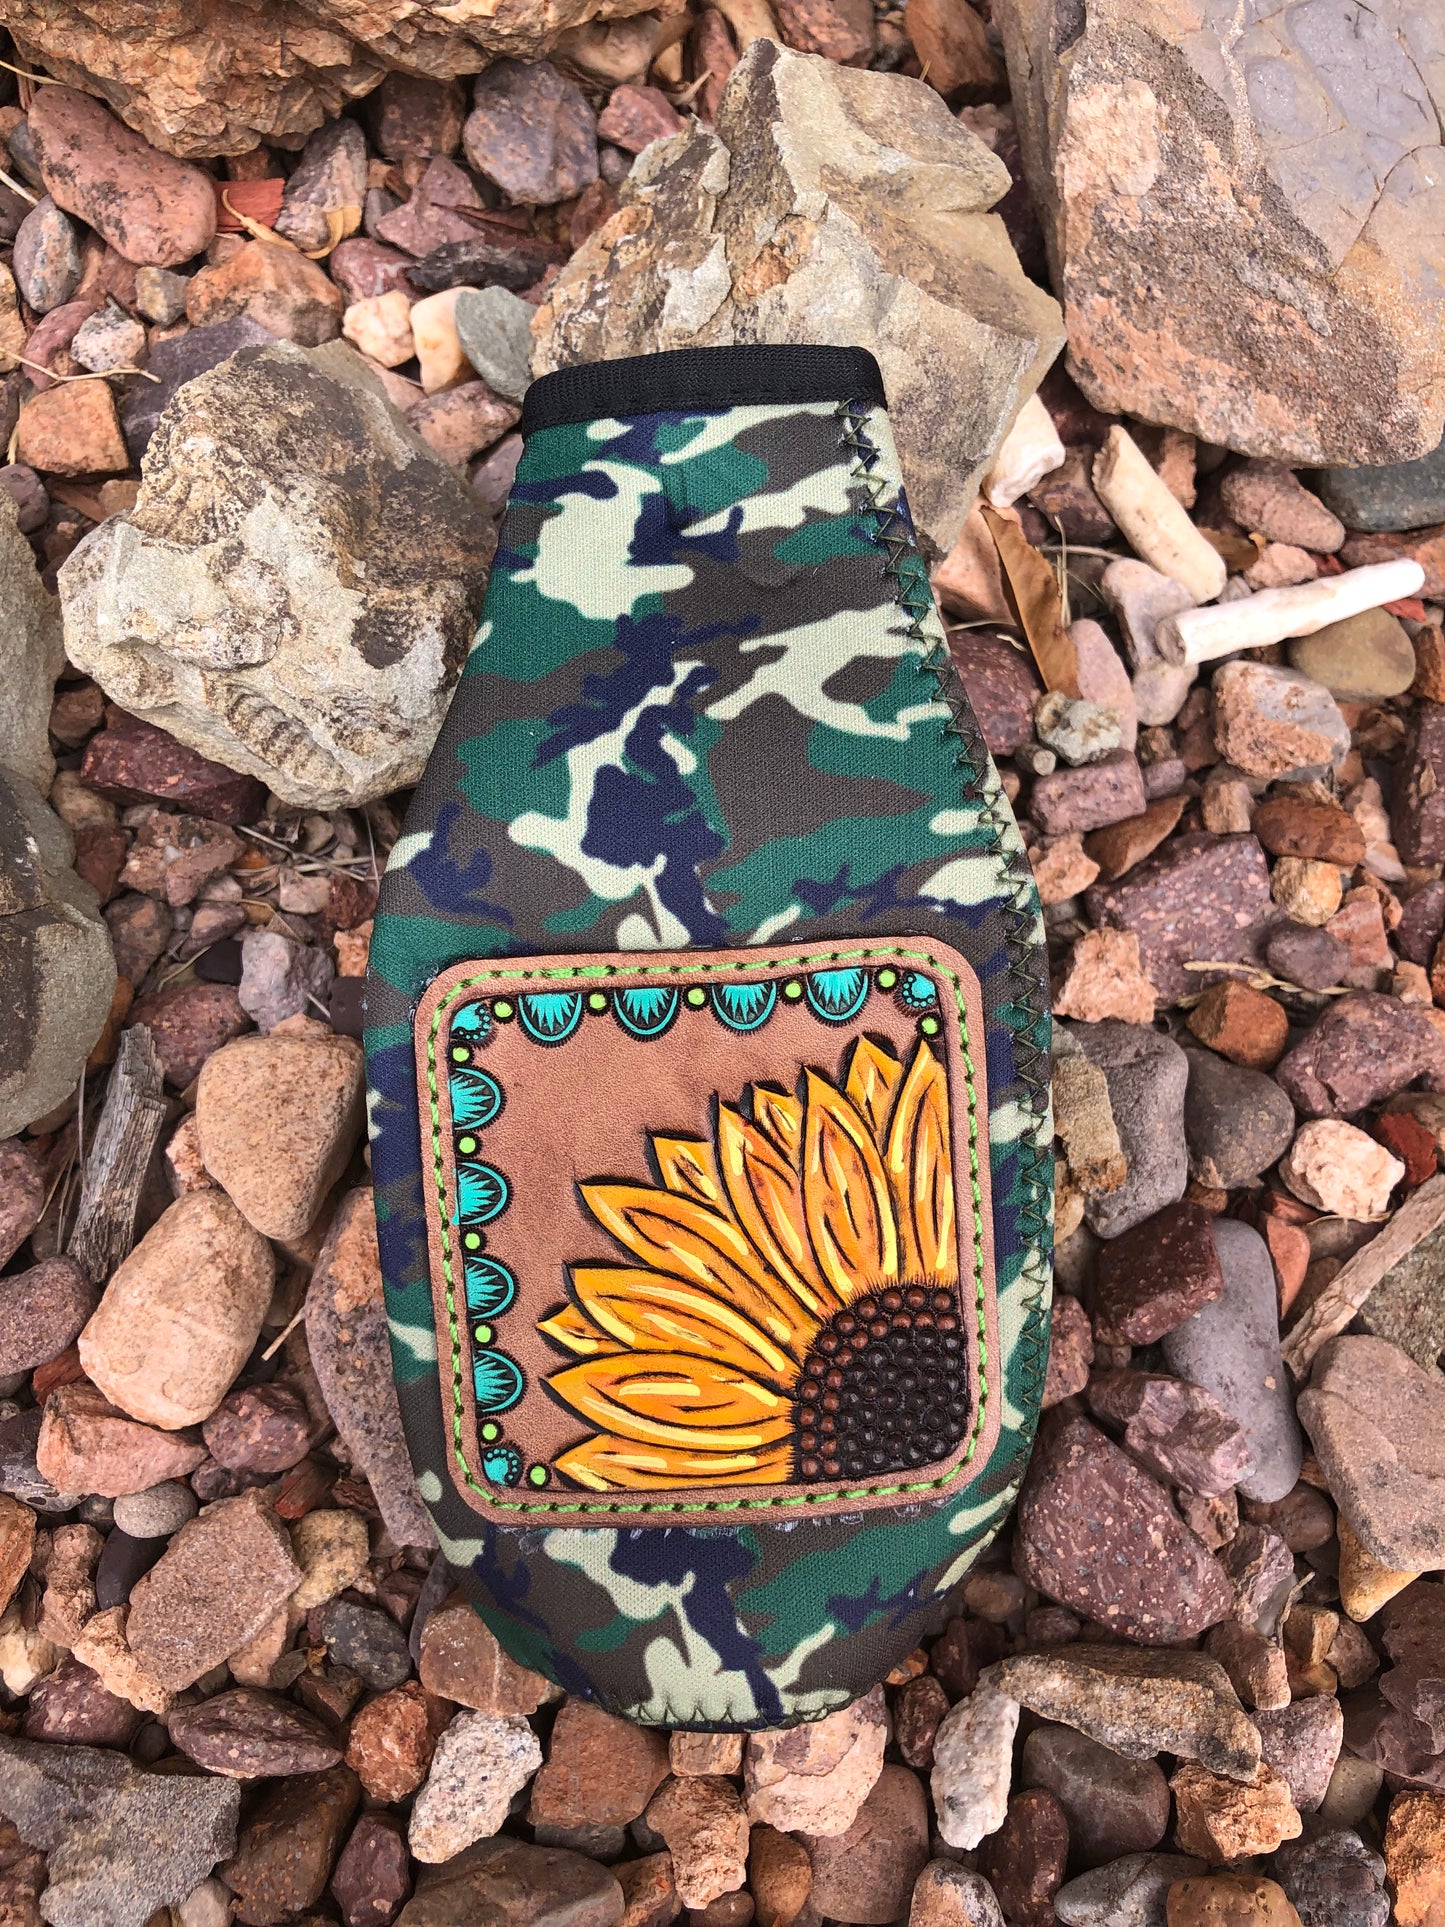 Western tooled leather patch bottle koozie